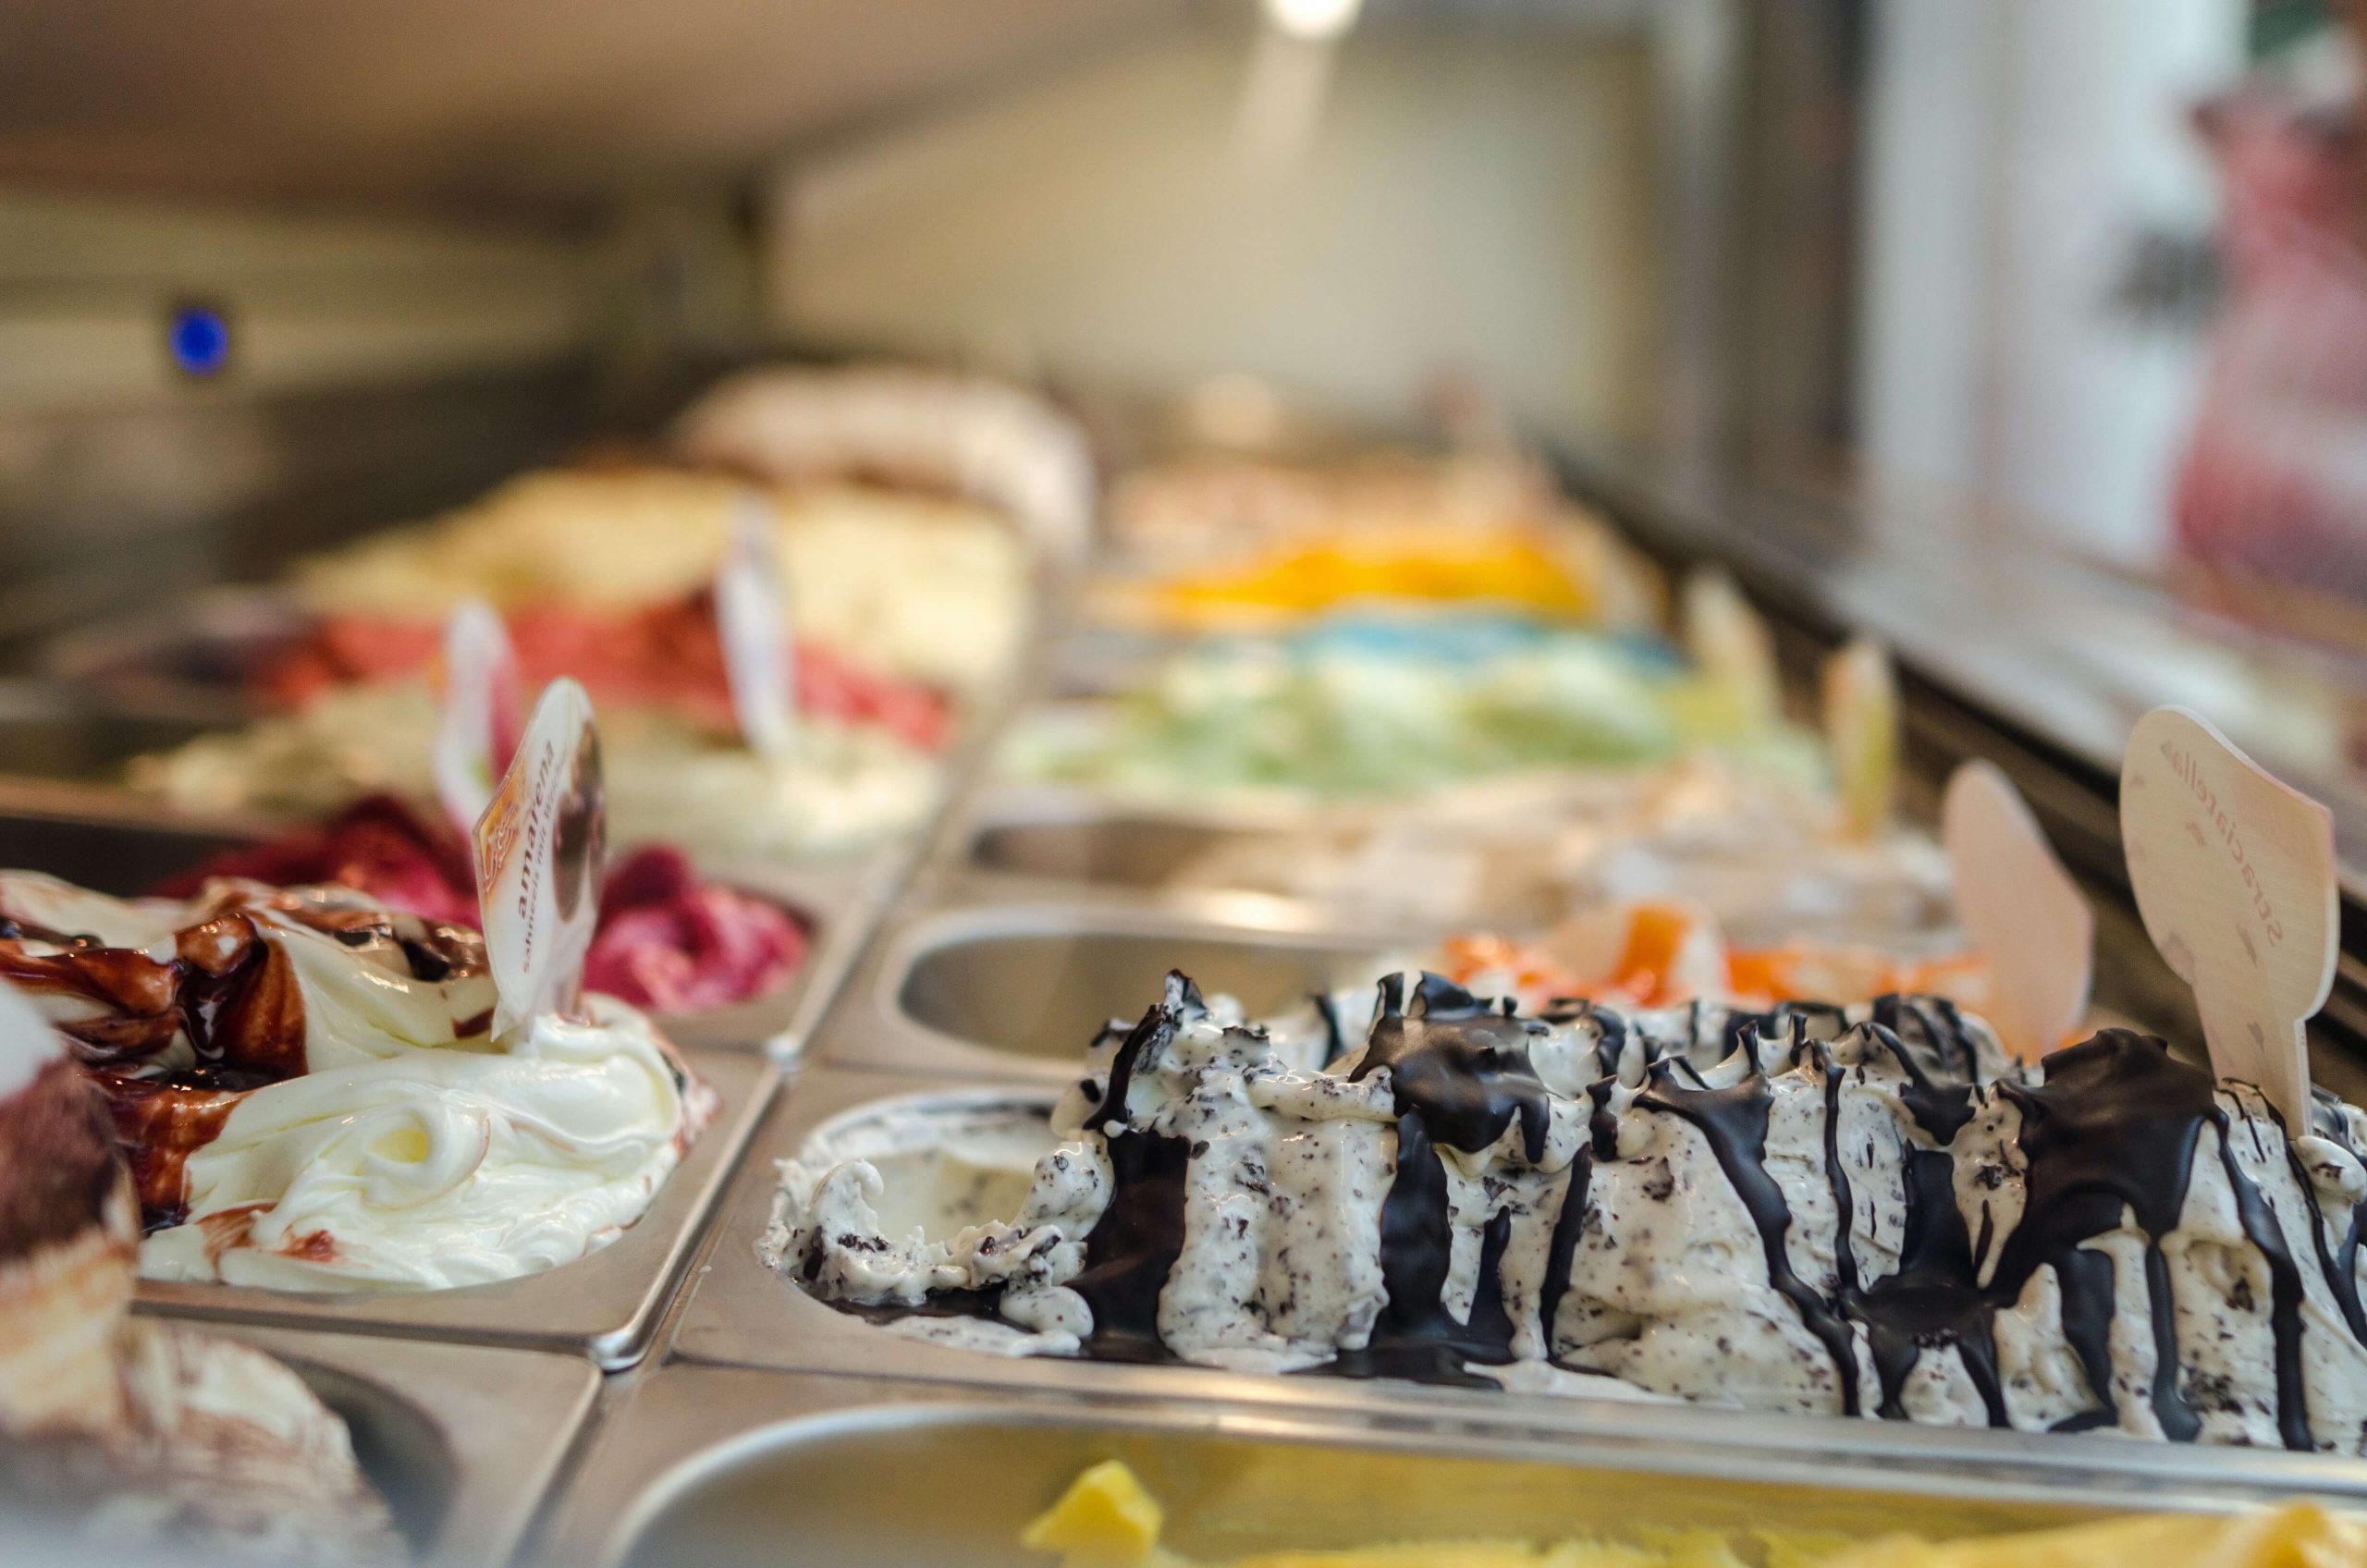 Company insurance is intended to safeguard the financial assets of a business owner and is a necessary investment for a gelato shop.